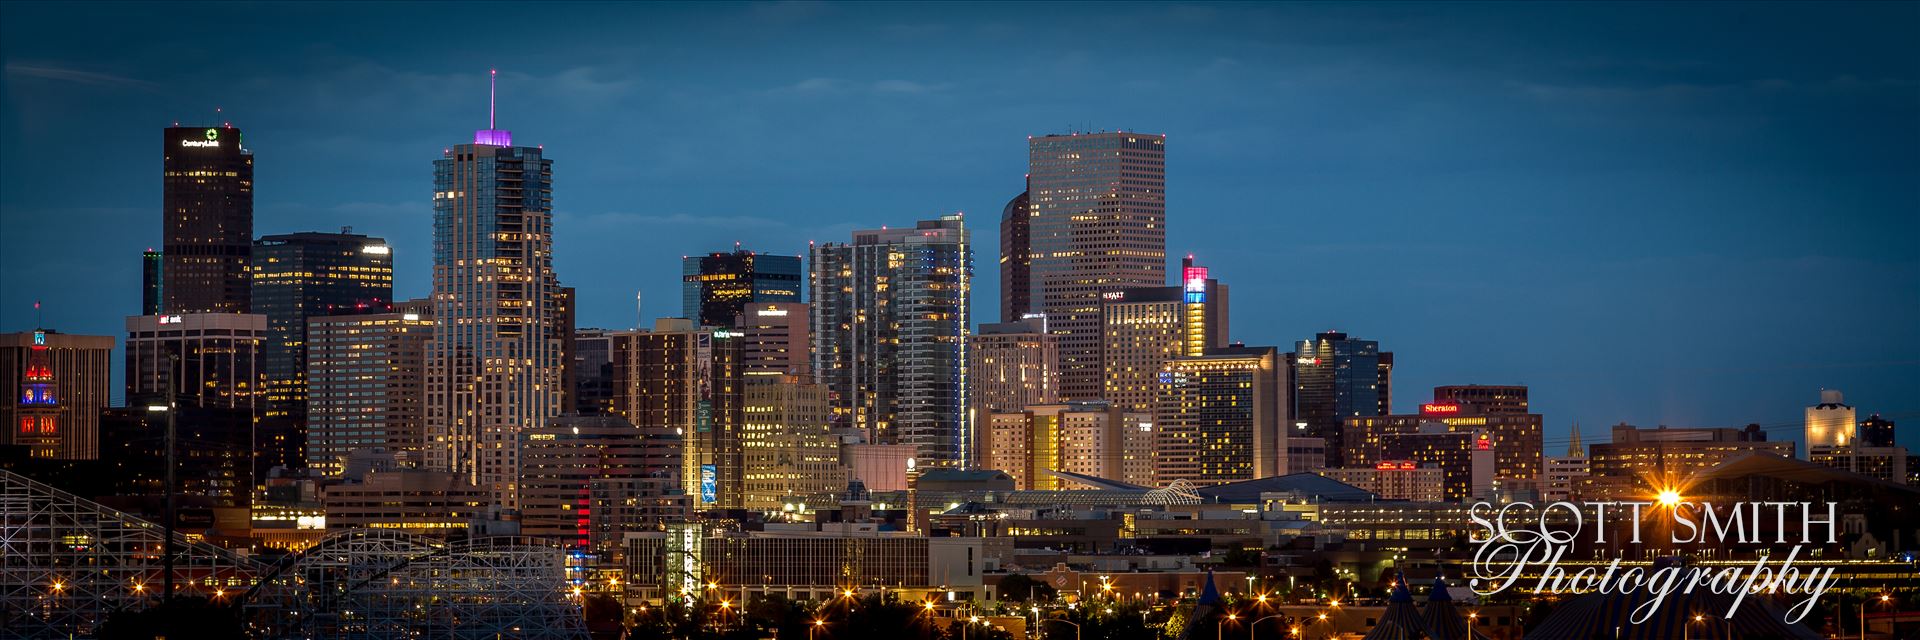 Denver at Night - The Denver skyline as seen from Mile High Stadium. by Scott Smith Photos